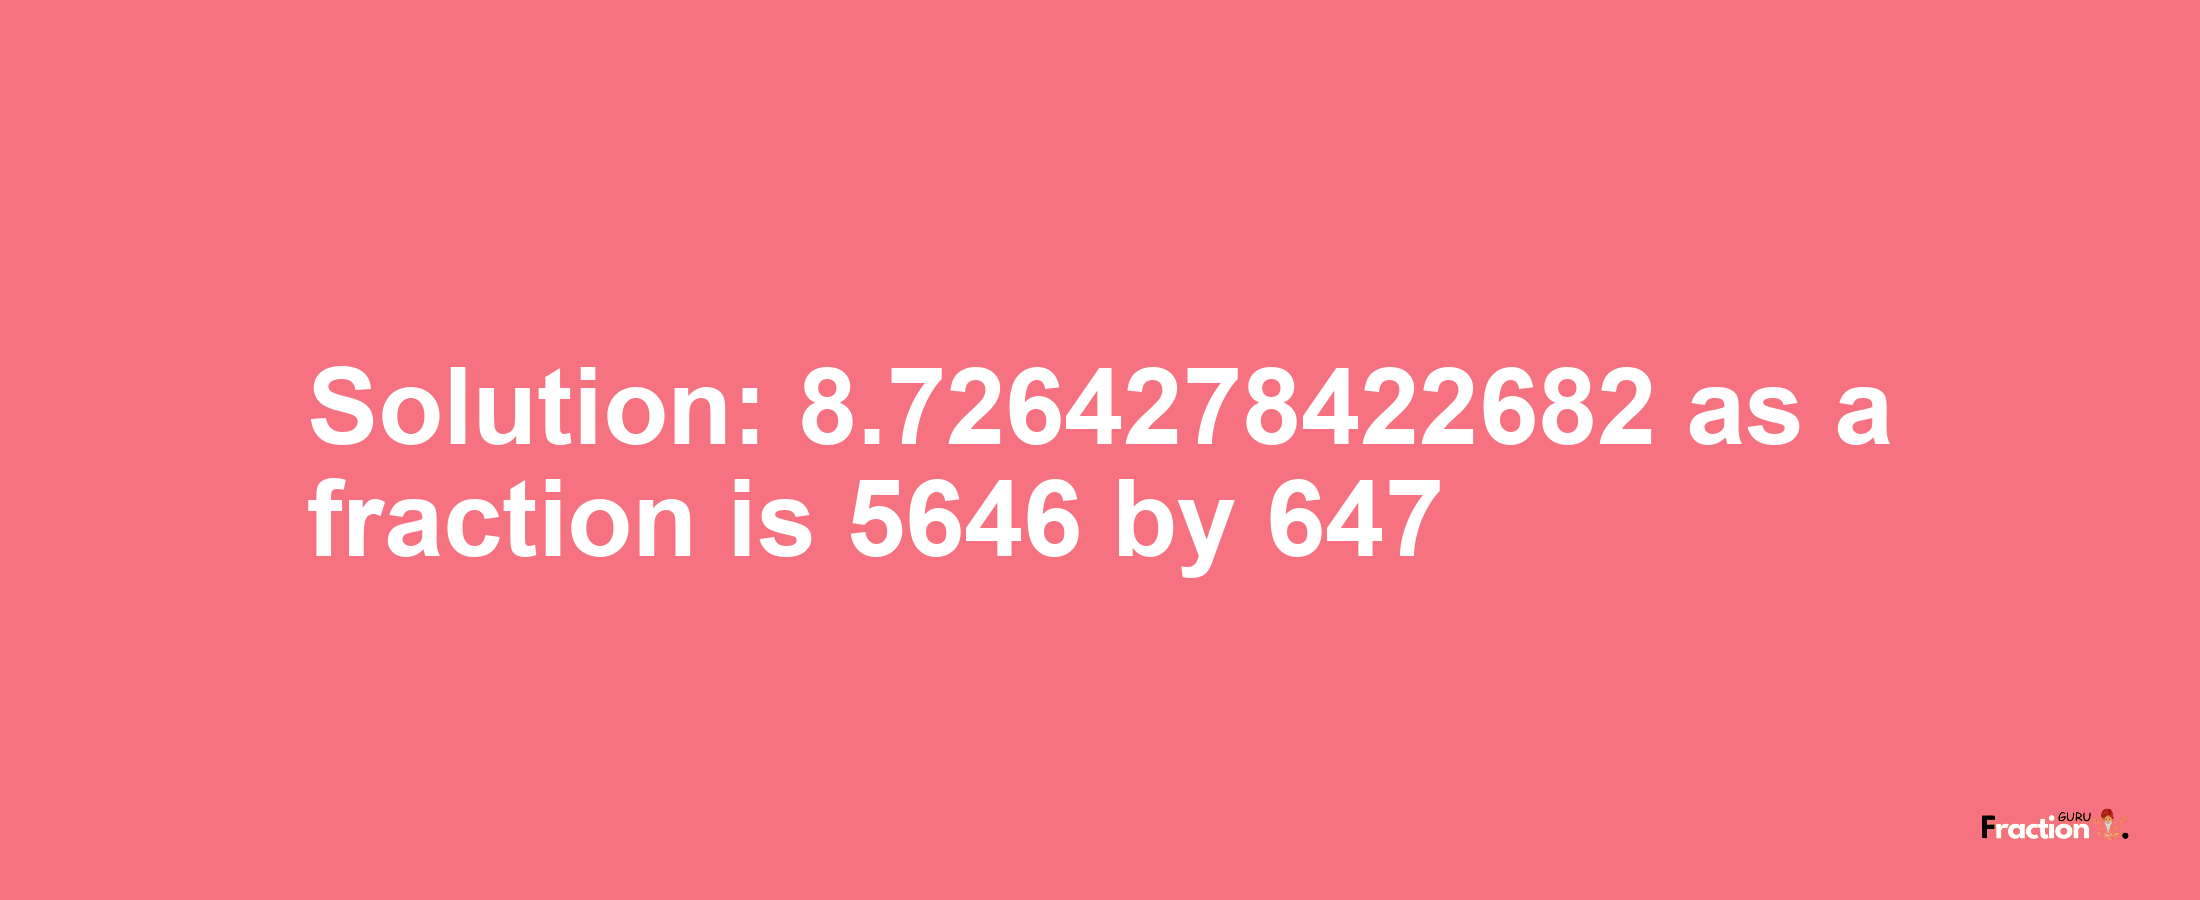 Solution:8.7264278422682 as a fraction is 5646/647